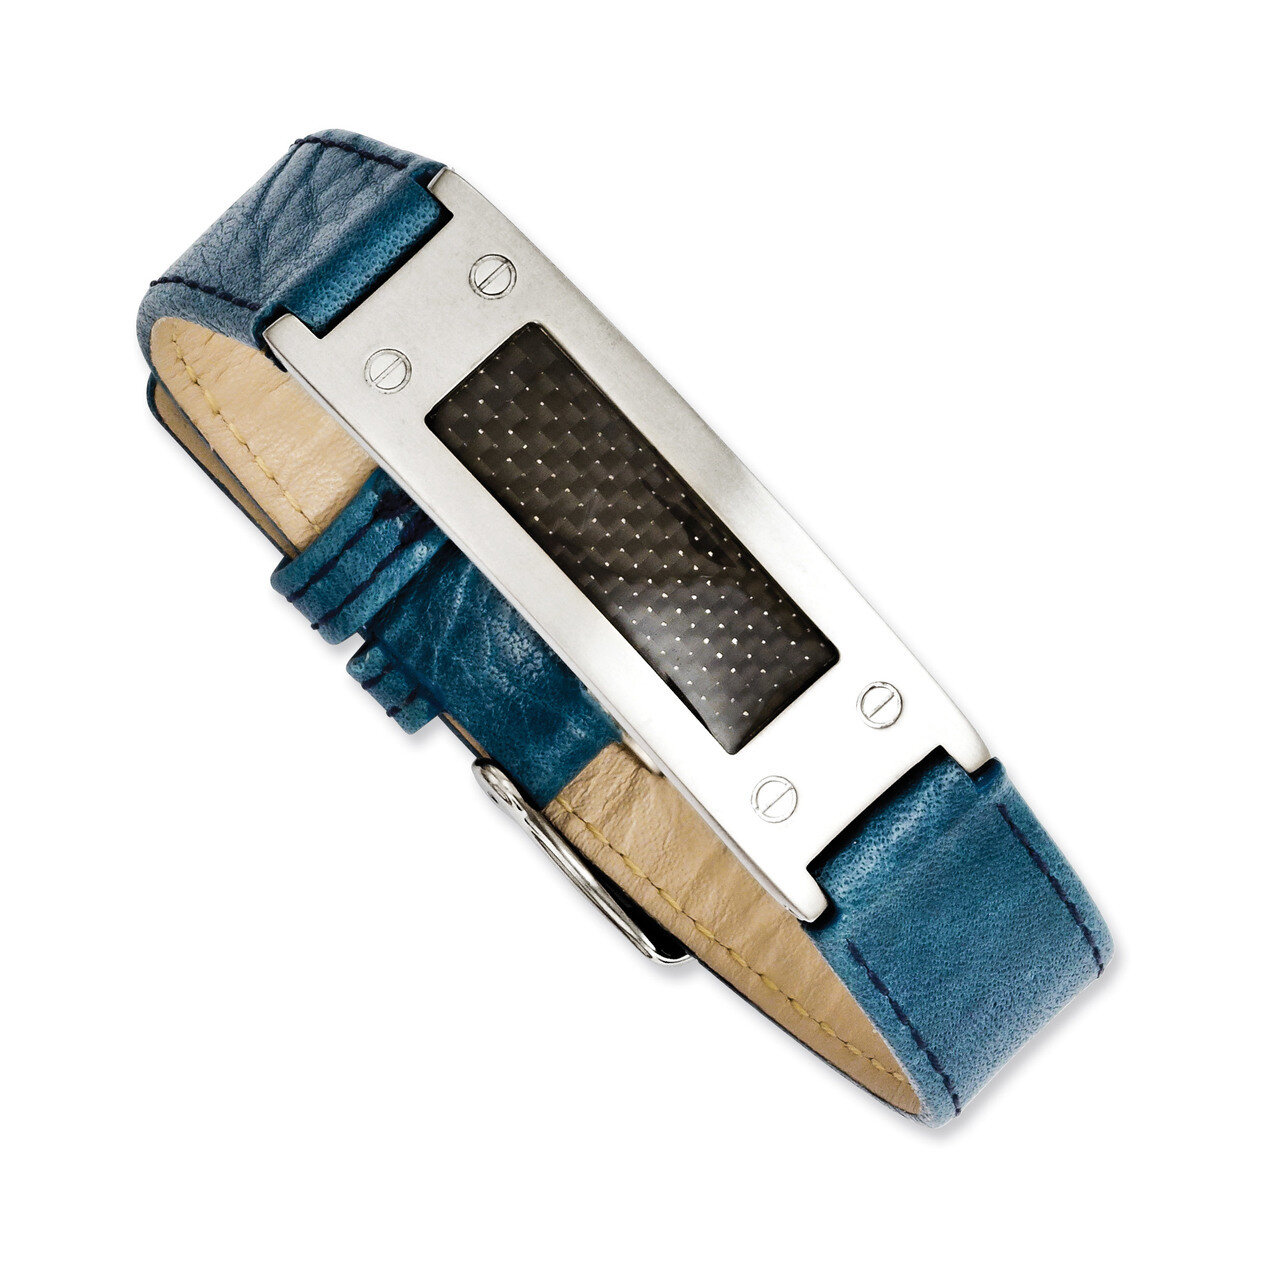 Textured Blue Leather with Carbon Fiber Inlay Buckle Bracelet Stainless Steel SRB1120-8.25